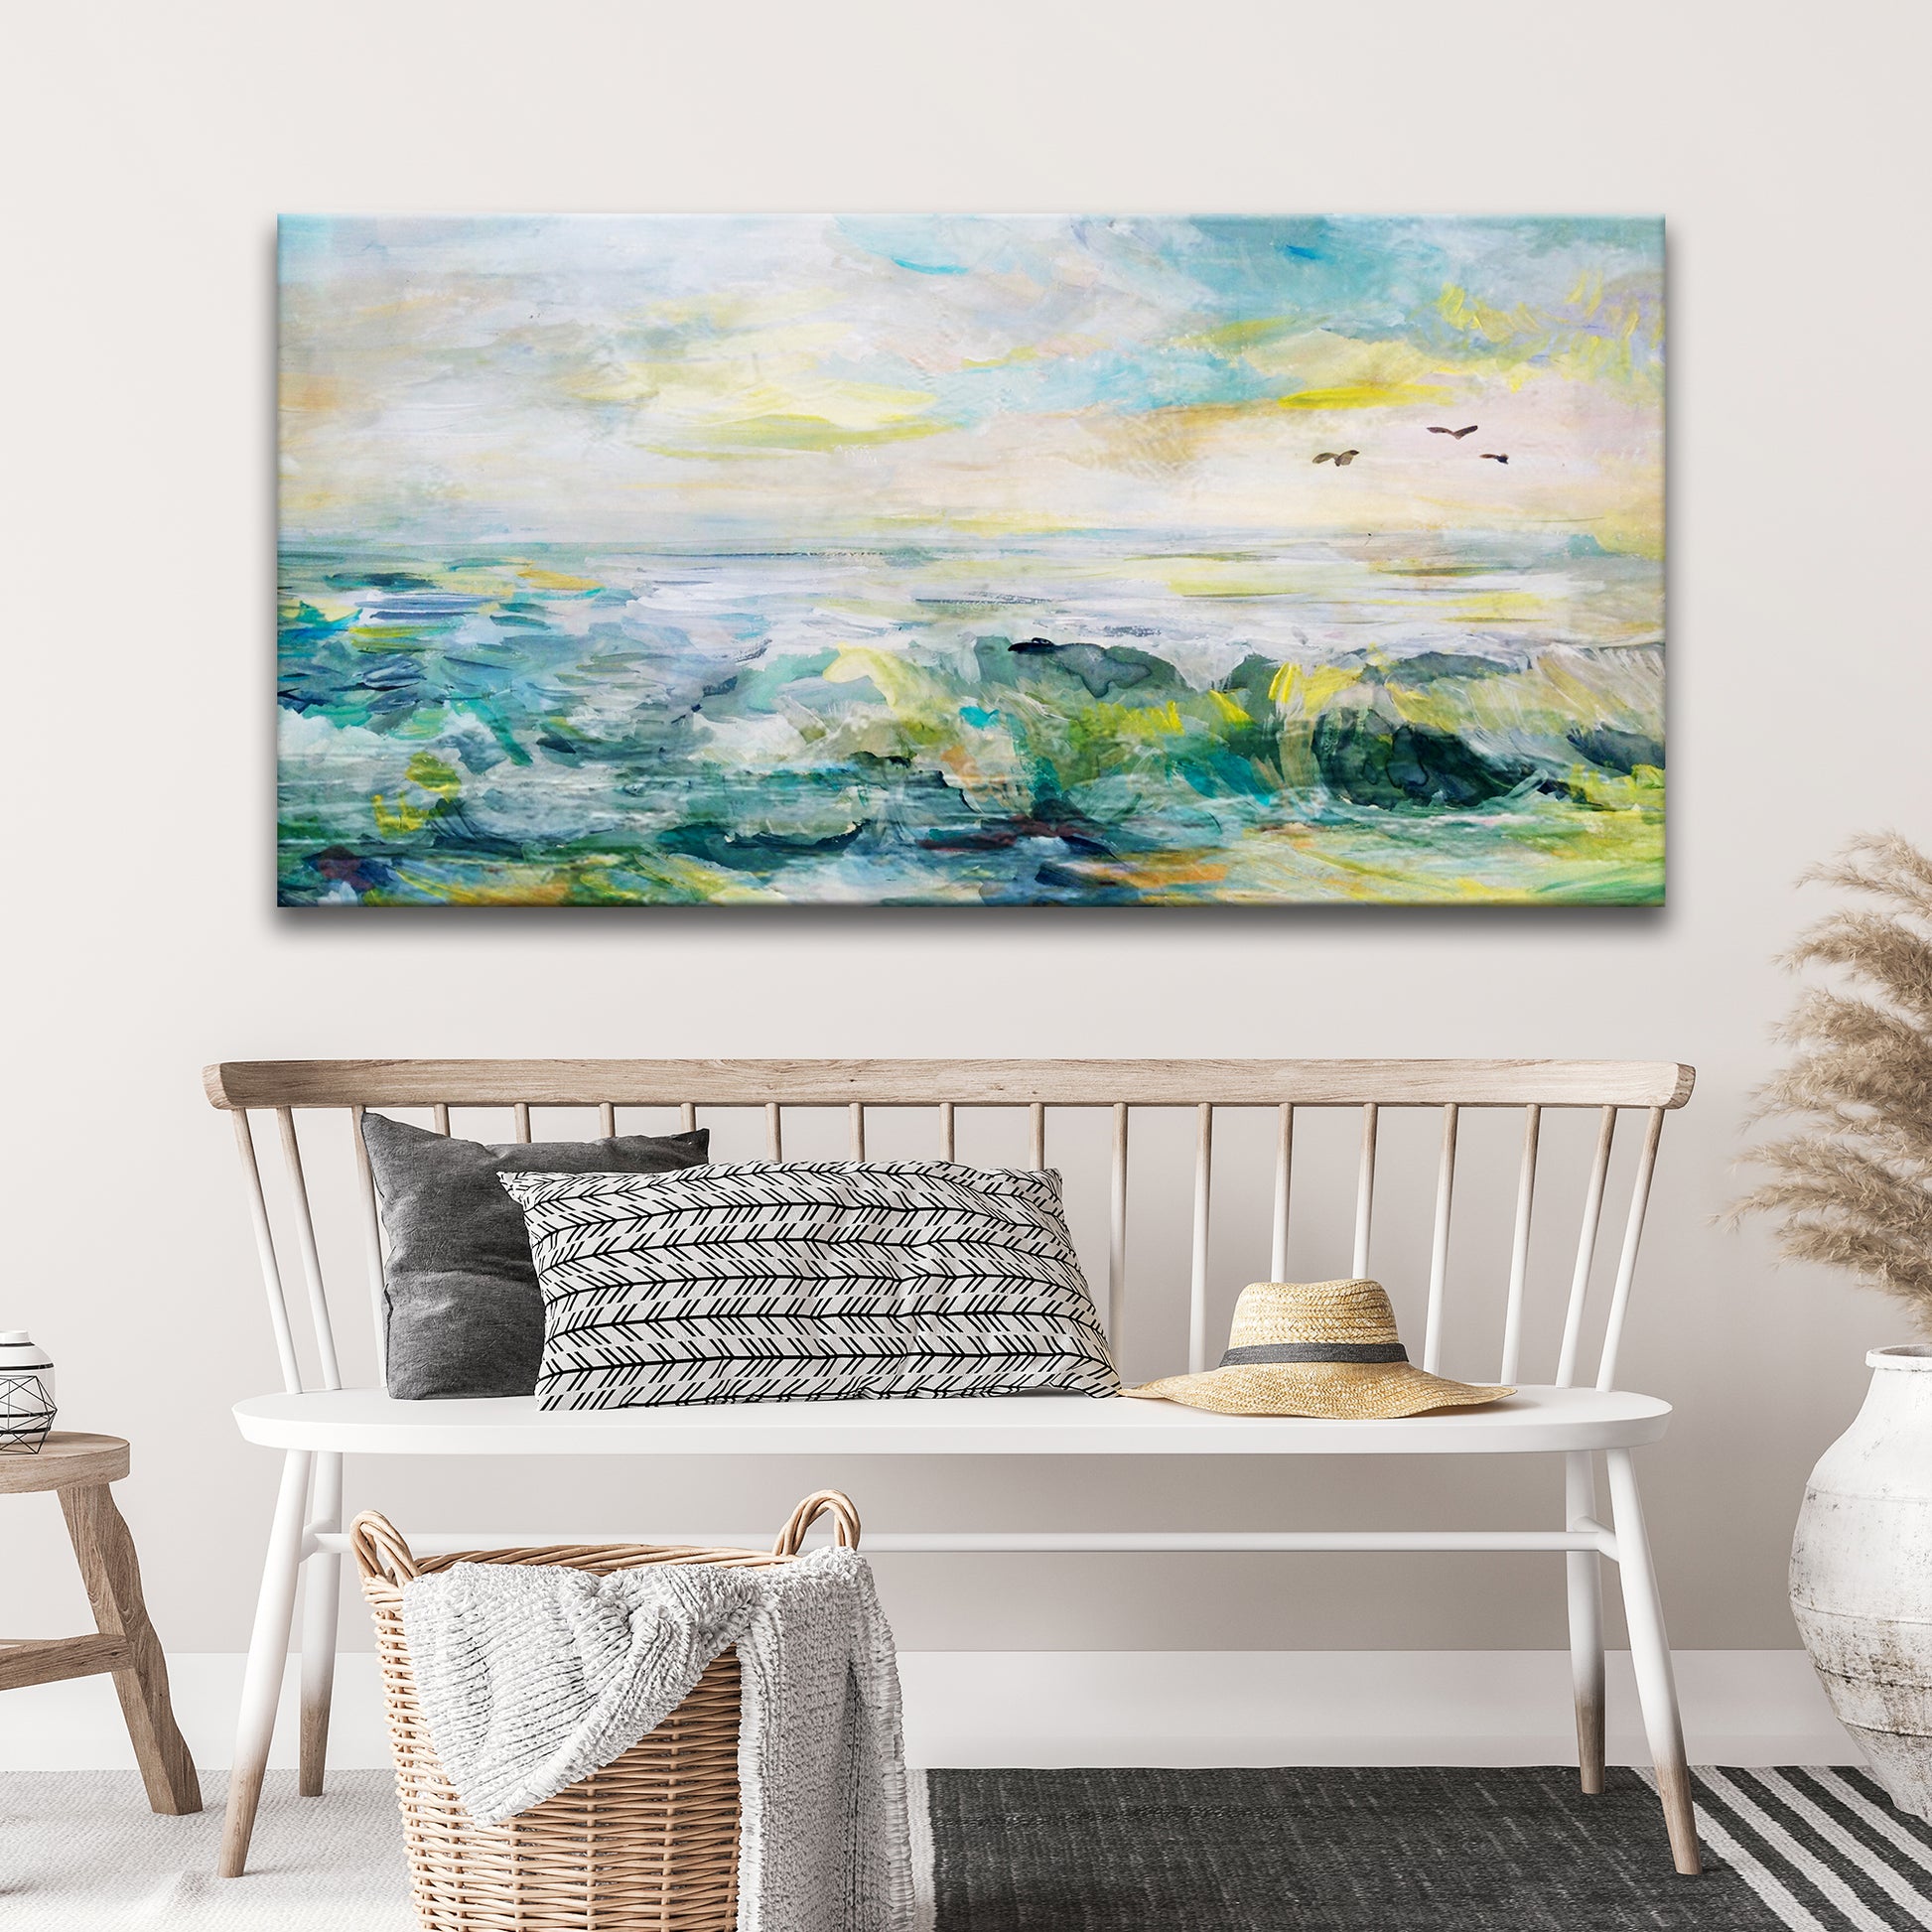 Rocks, Sea, And Sky Canvas Wall Art Style 1 - Image by Tailored Canvases